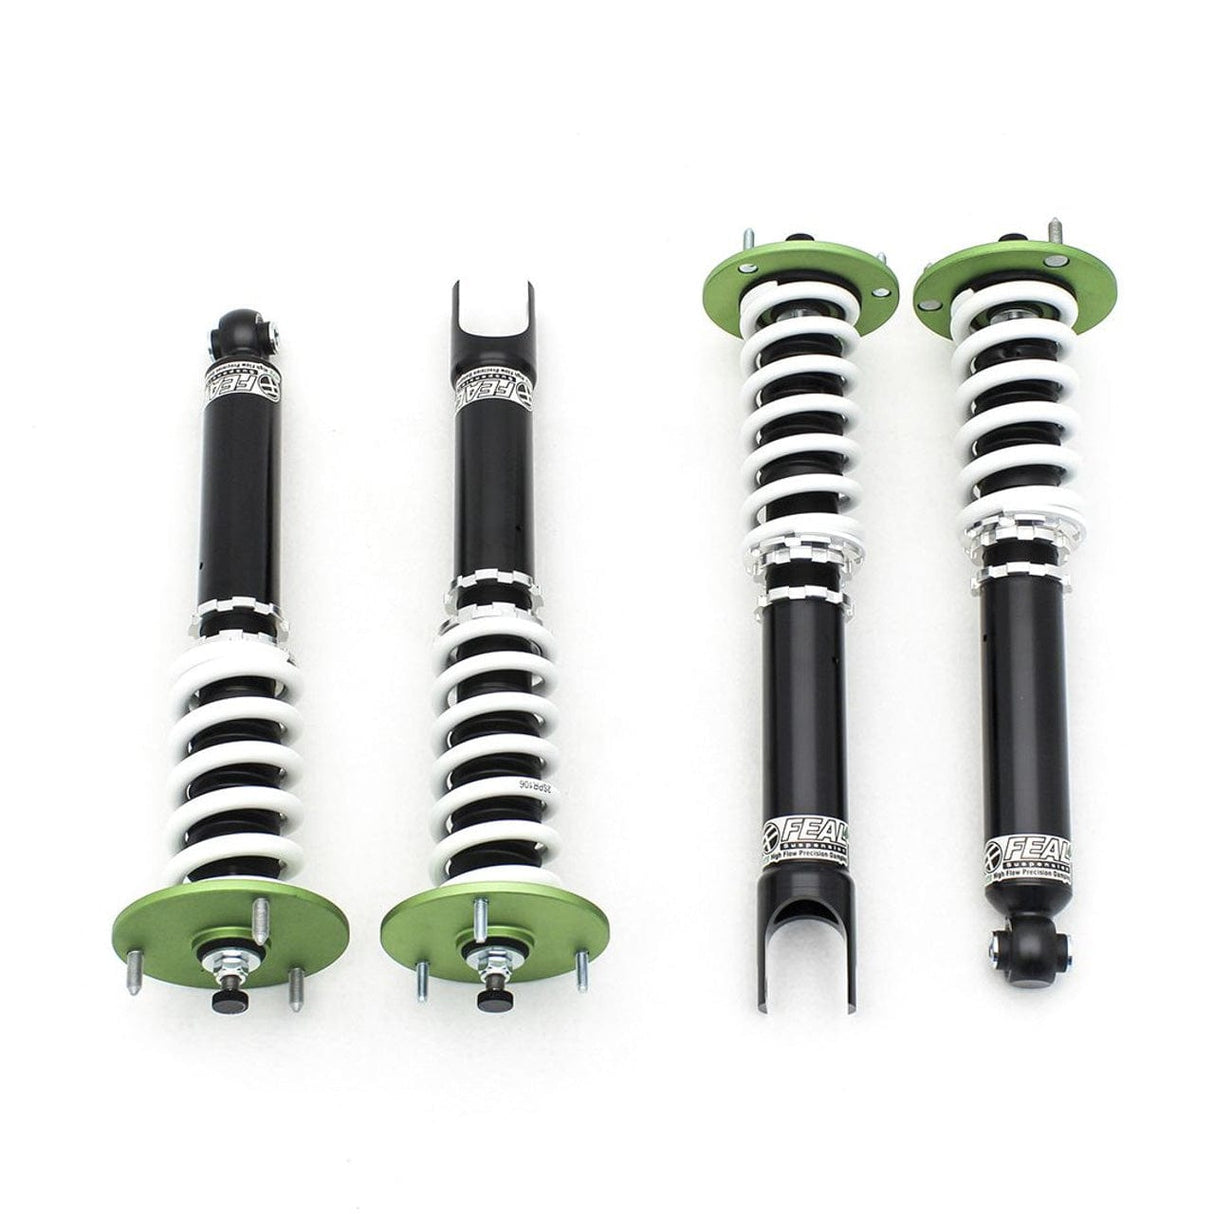 Feal 441 Coilovers - 2002-2006 Acura Integra (DC5)